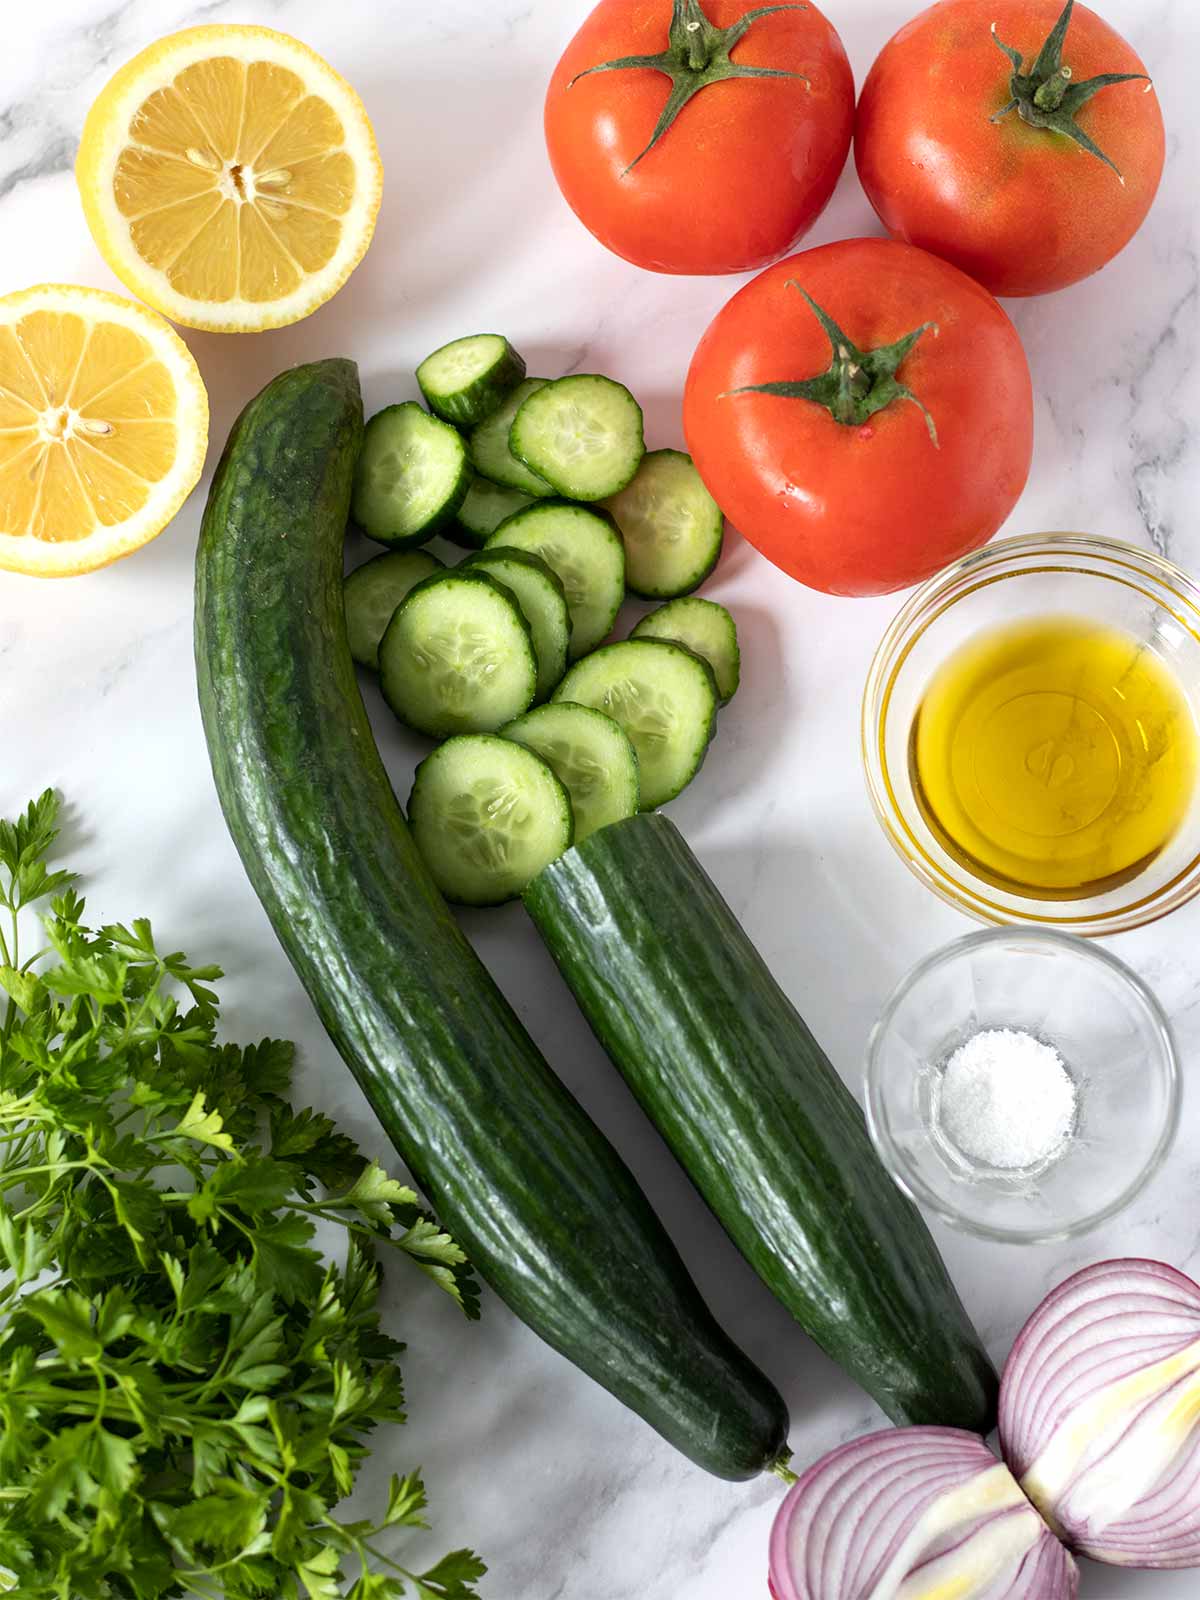 Fresh whole foods for preparing healthy low-calorie salad side dish: cucumbers, tomatoes, red onion, parsley, lemon, extra virgin olive oil, and salt.